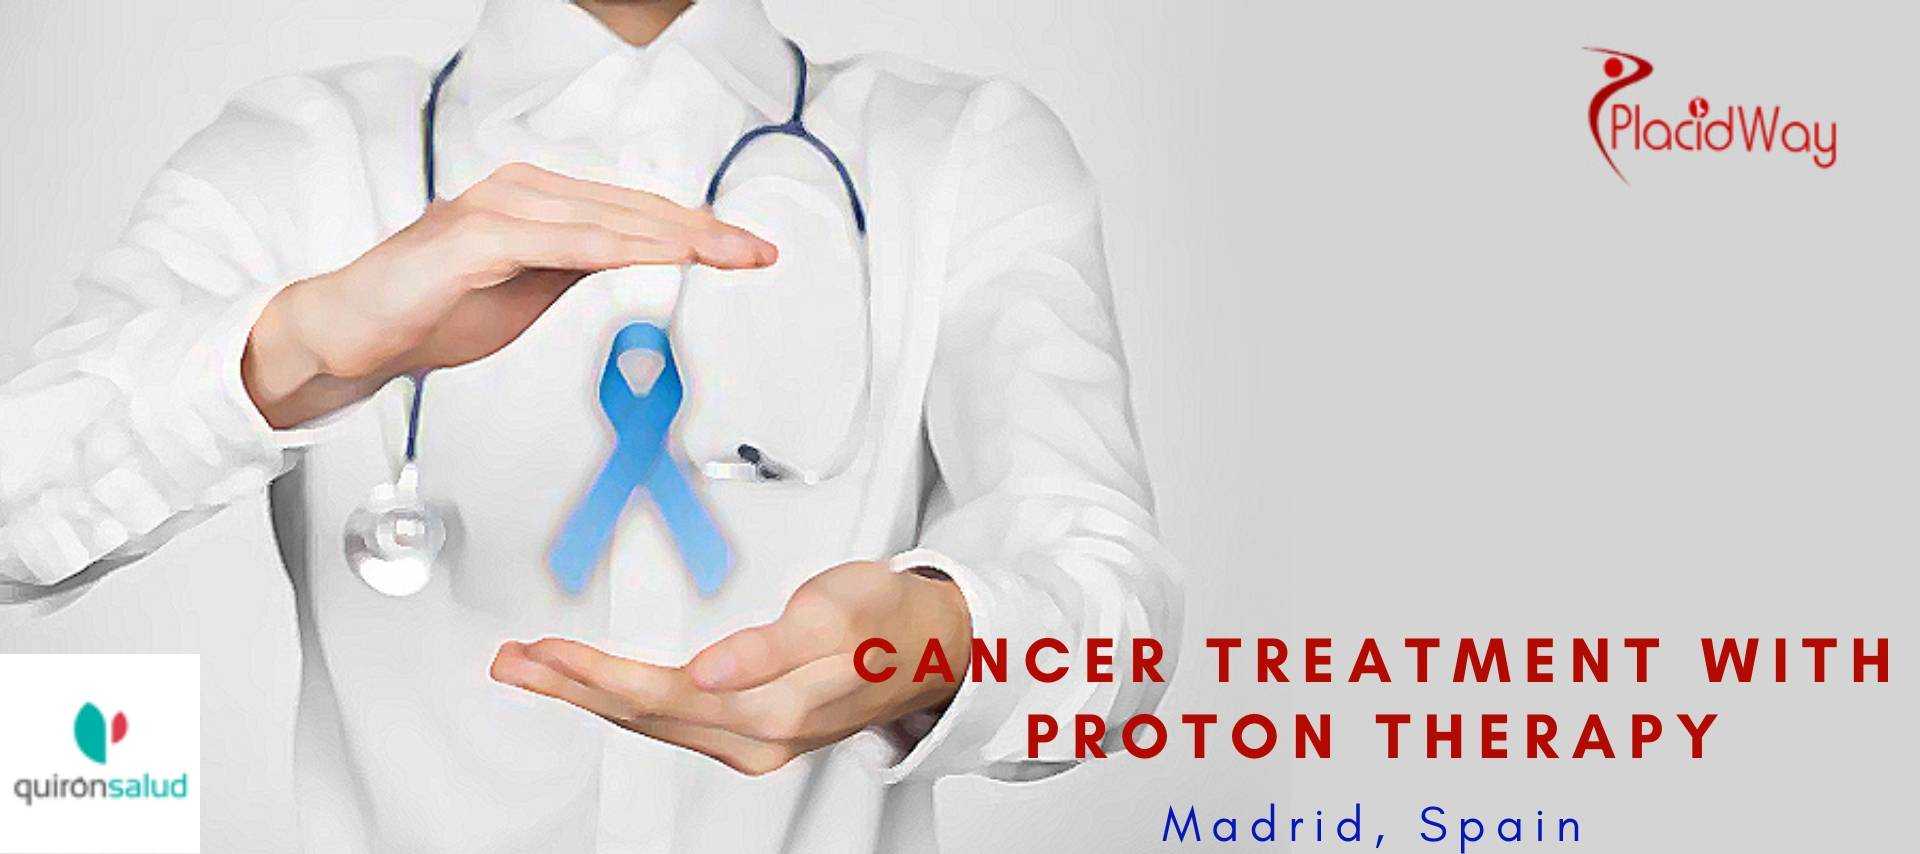 Cancer Treatment with Proton Therapy